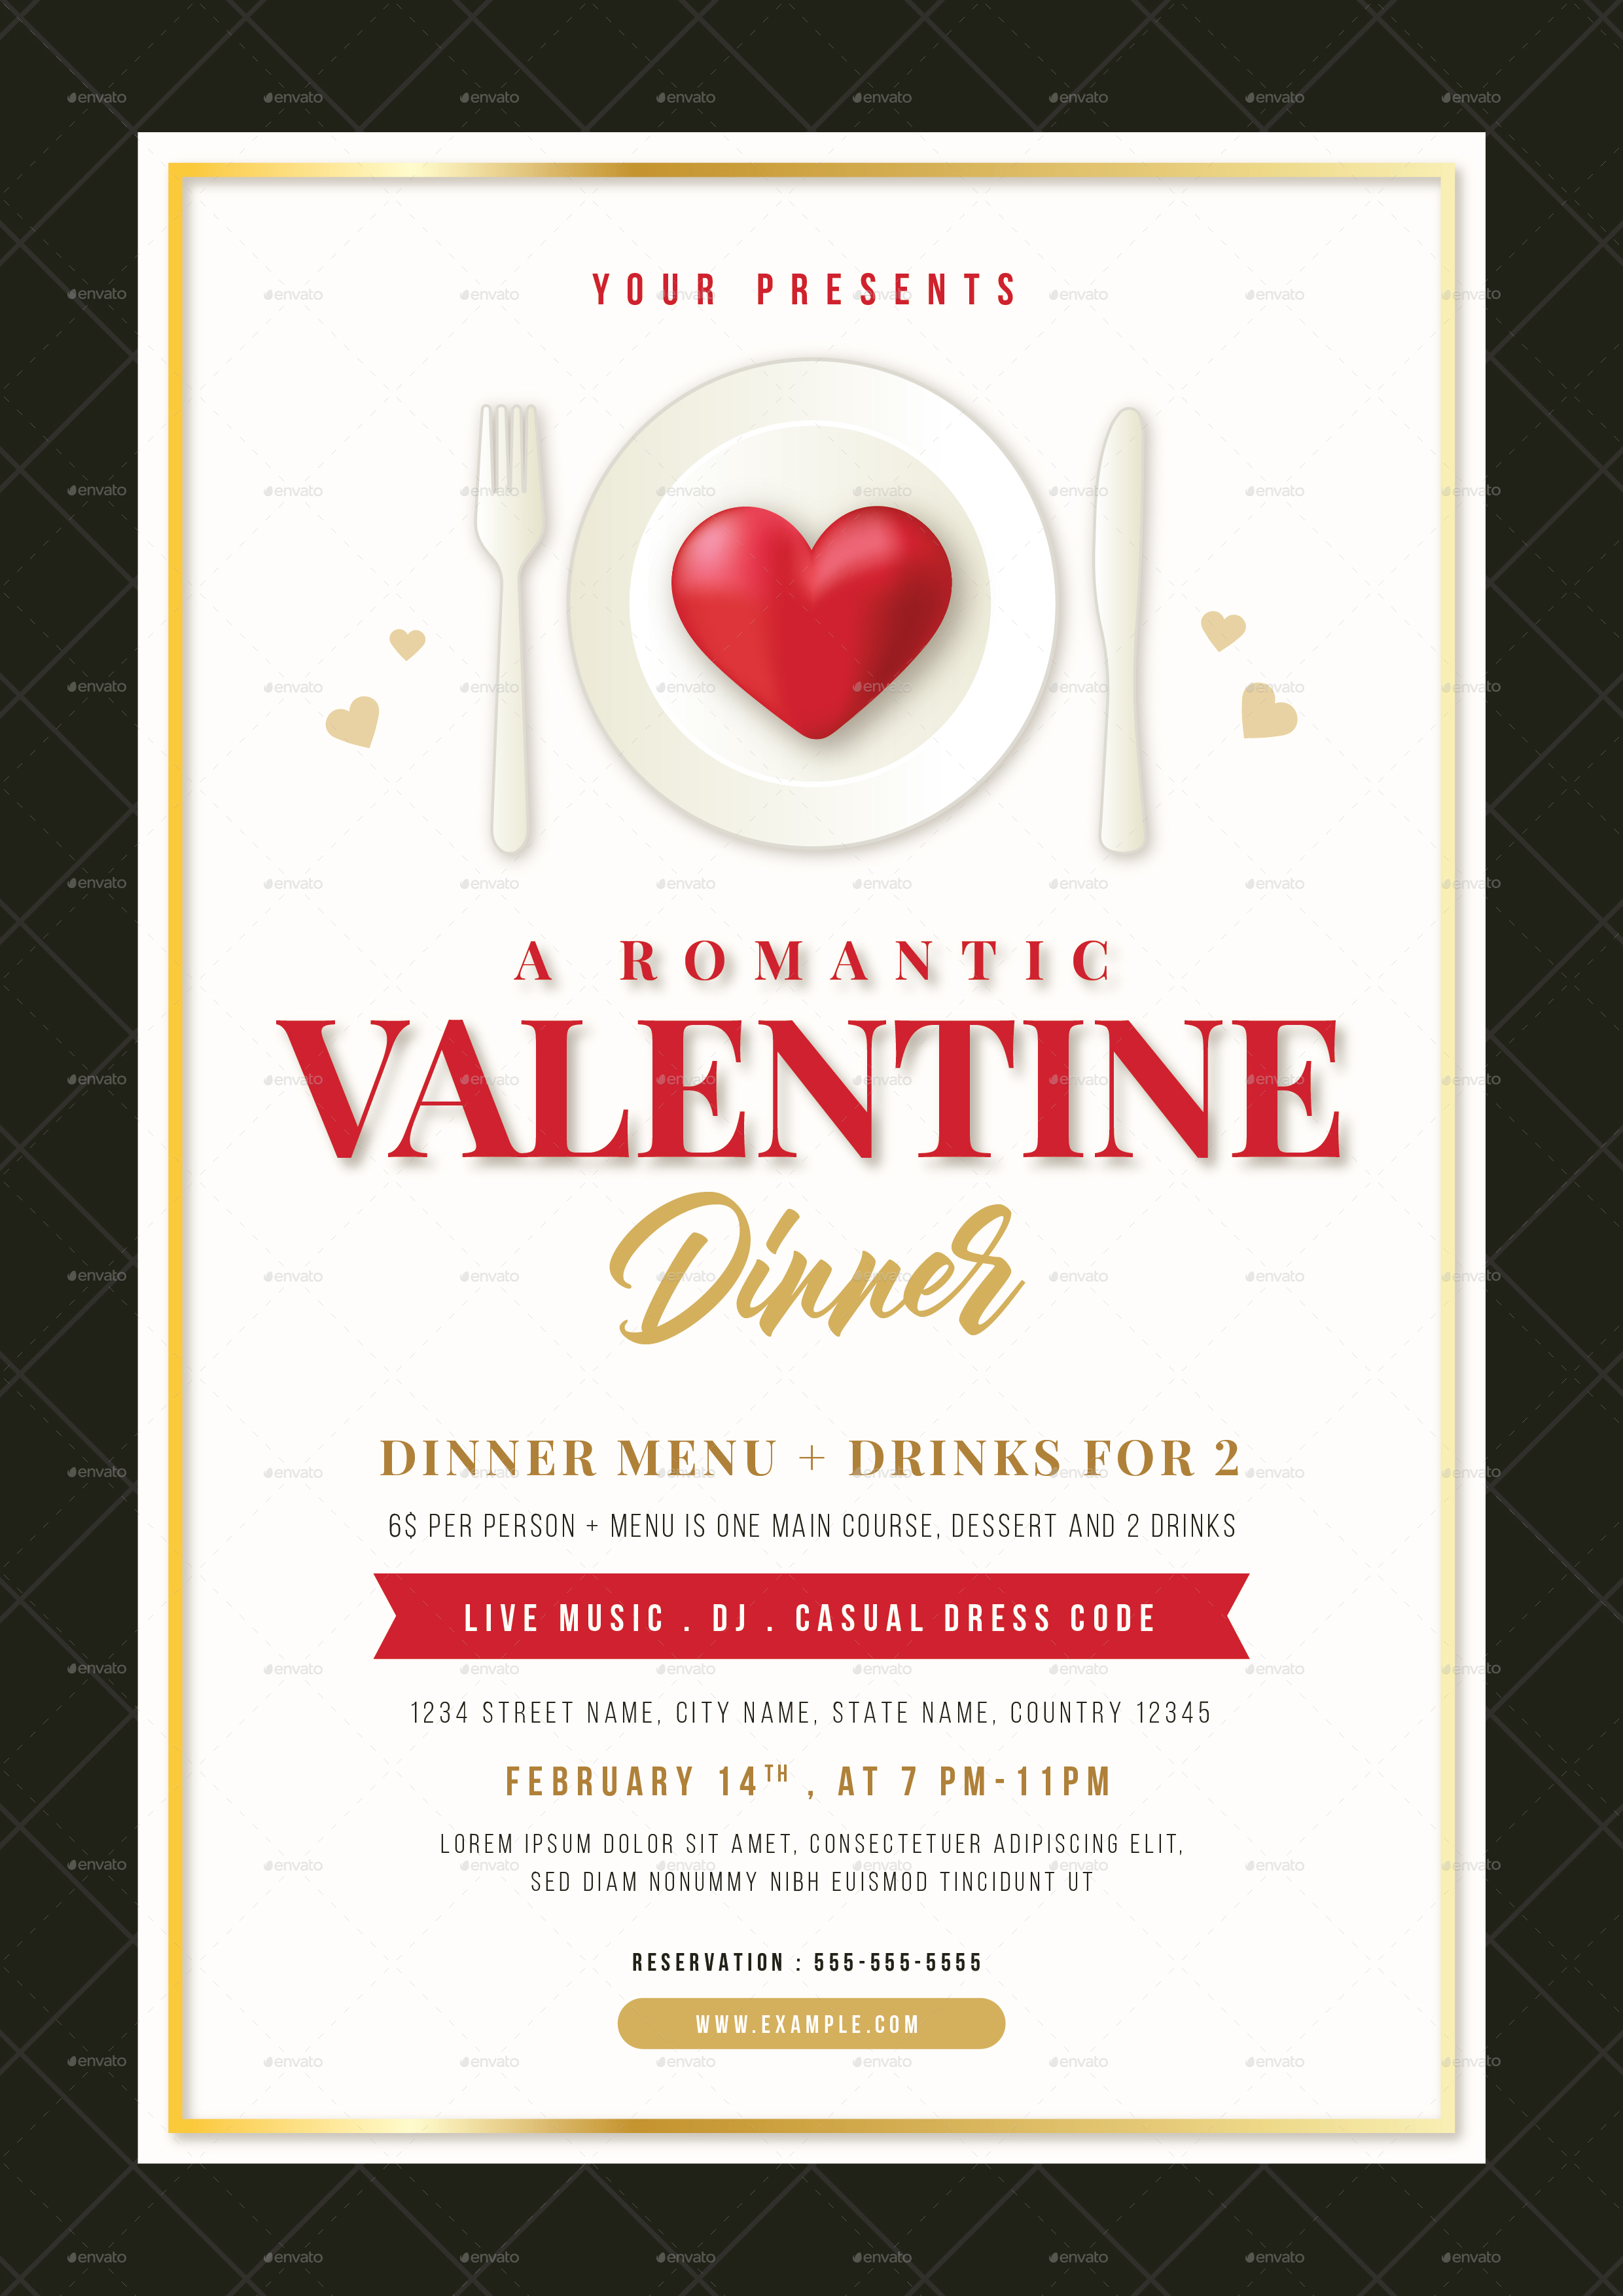 Valentine Dinner Flyer And Menu Template By Vectorvactory Graphicriver